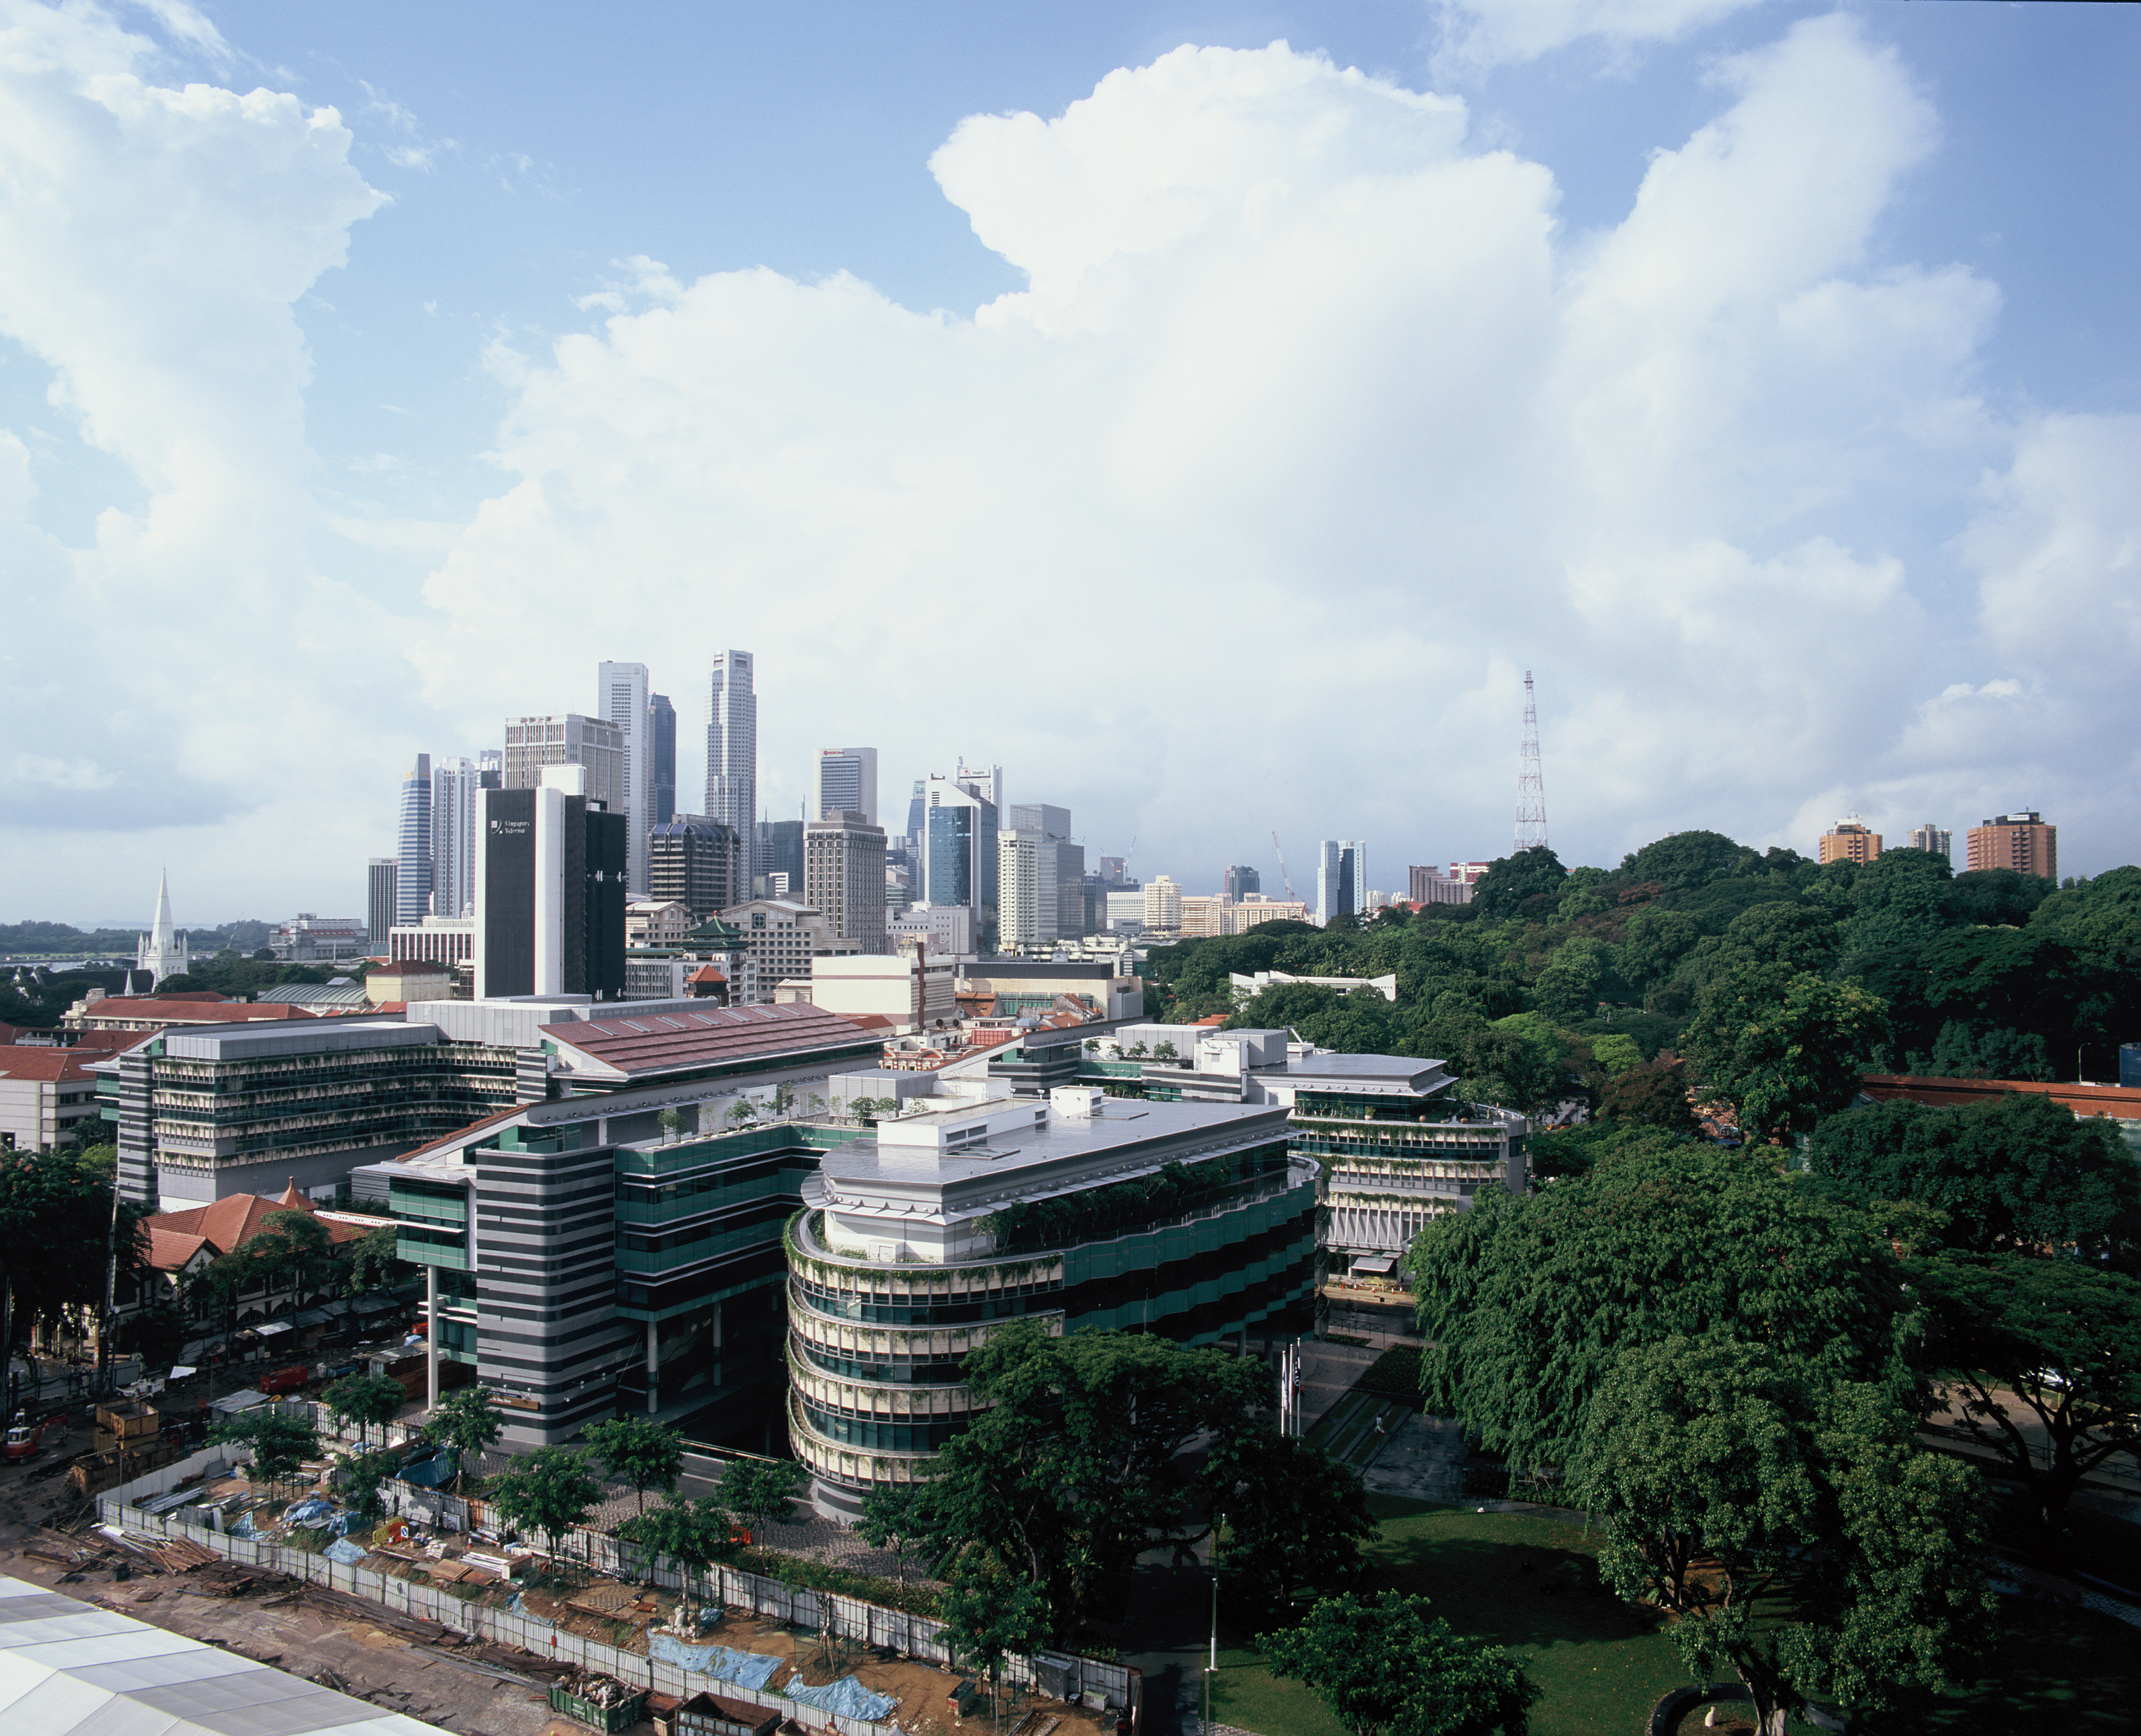 Move to the city – Bras Basah Campus